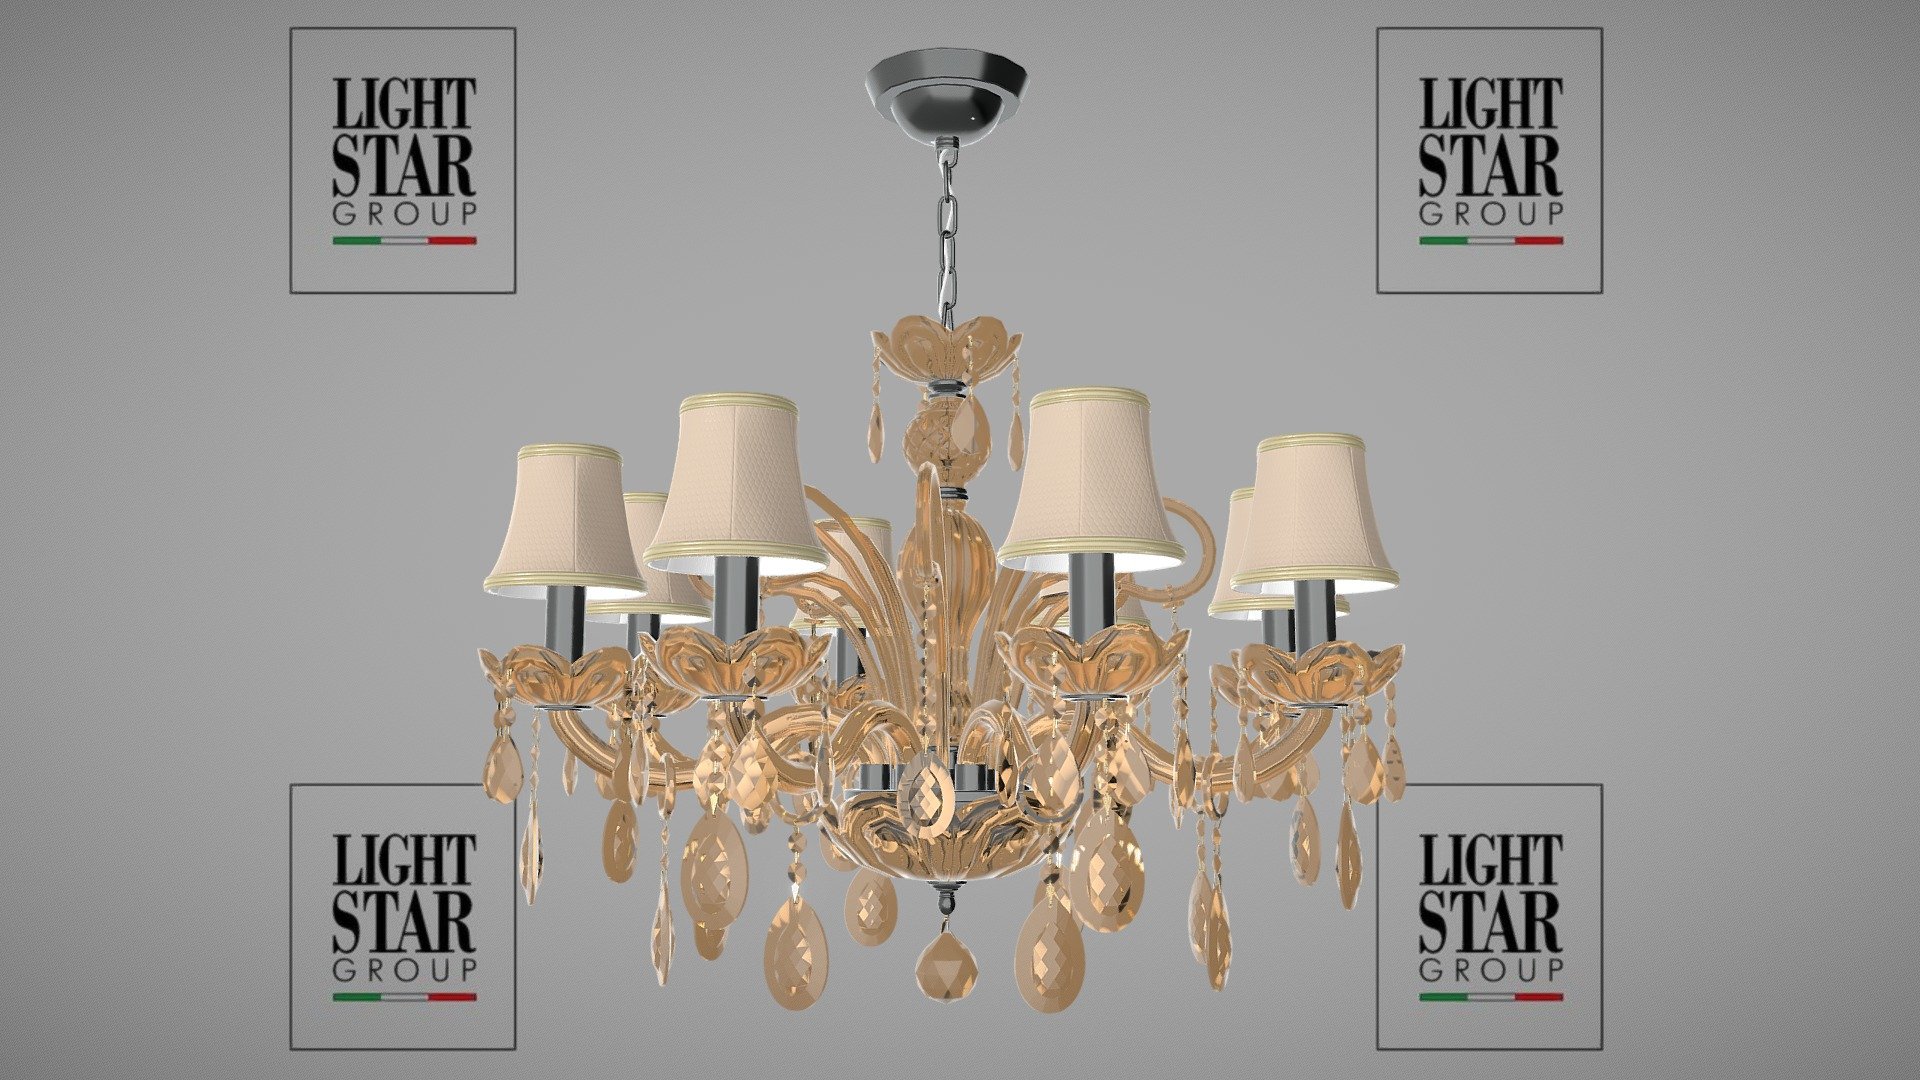 721083 Acesso Osgona Chandelier

xxxxxxxxxxxxxxxxxxxxxxxxxx

You can find this and many other of my 3d models for 3ds Max + Vray here: https://3dsky.org/users/skover/models

xxxxxxxxxxxxxxxxxxxxxxxxxx - 721083 Acesso Osgona Chandelier - 3D model by LIGHTSTAR GROUP (@LIGHT_STAR_GROUP) 3d model